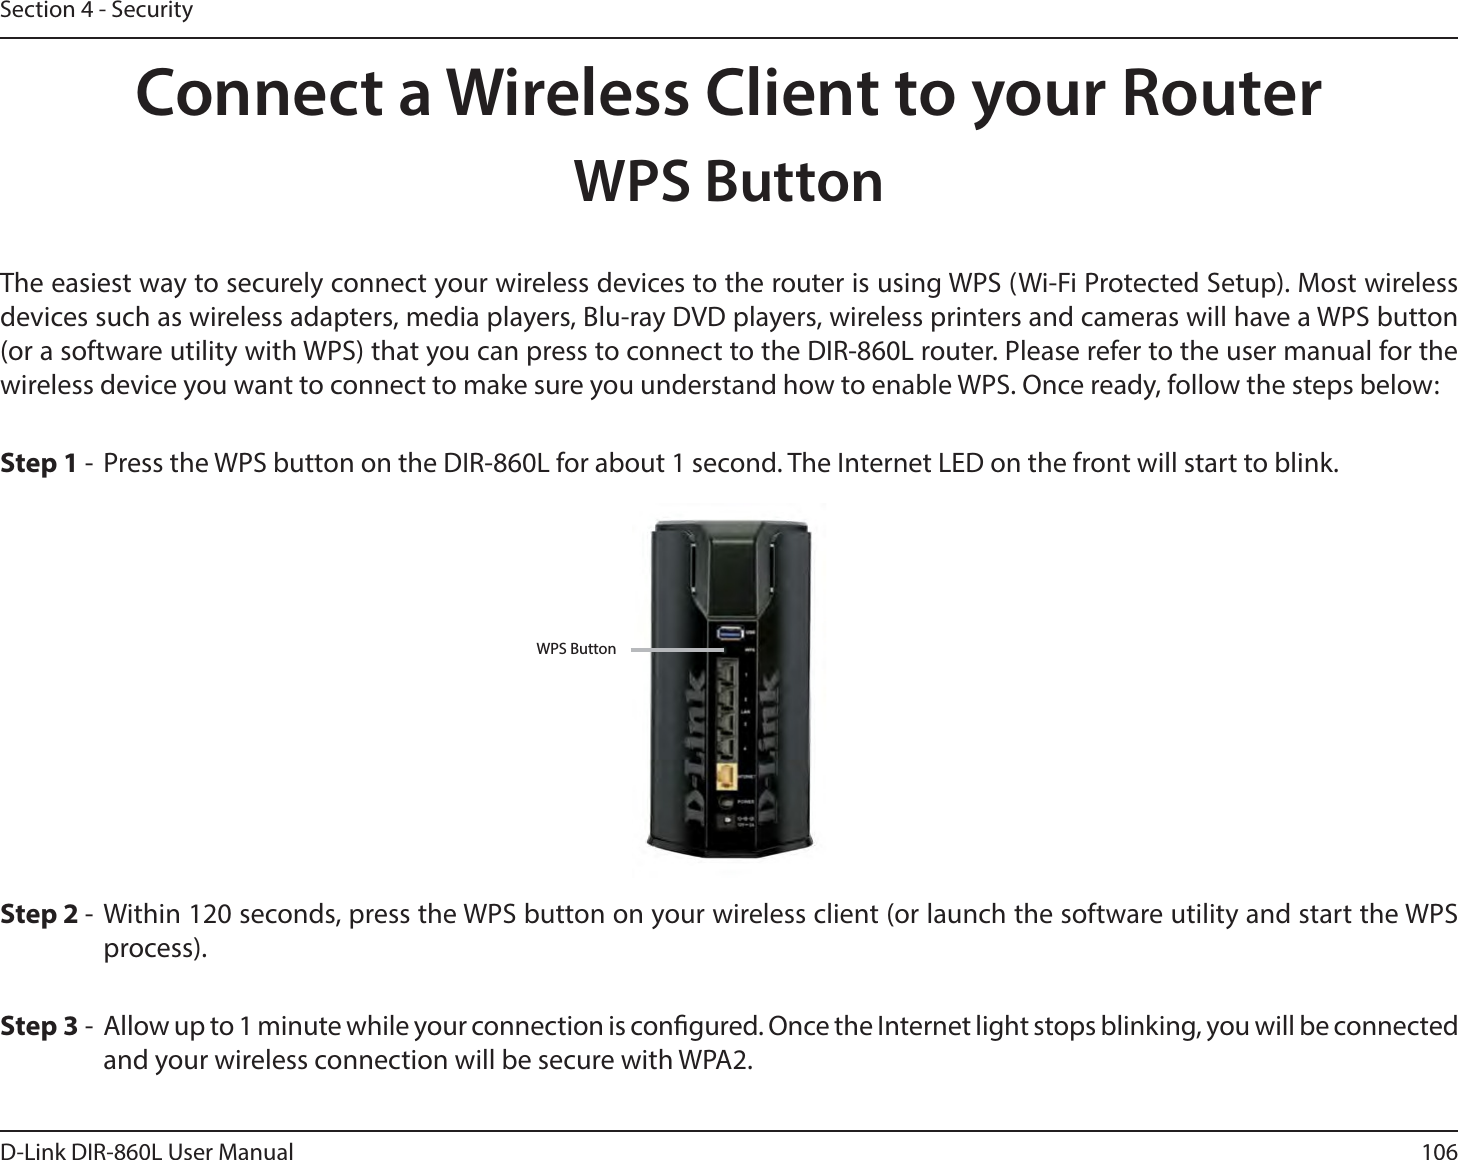 106D-Link DIR-860L User ManualSection 4 - SecurityConnect a Wireless Client to your RouterWPS ButtonStep 2 - Within 120 seconds, press the WPS button on your wireless client (or launch the software utility and start the WPS process).The easiest way to securely connect your wireless devices to the router is using WPS (Wi-Fi Protected Setup). Most wireless devices such as wireless adapters, media players, Blu-ray DVD players, wireless printers and cameras will have a WPS button (or a software utility with WPS) that you can press to connect to the DIR-860L router. Please refer to the user manual for the XJSFMFTTEFWJDFZPVXBOUUPDPOOFDUUPNBLFTVSFZPVVOEFSTUBOEIPXUPFOBCMF8140ODFSFBEZGPMMPXUIFTUFQTCFMPXStep 1 -  Press the WPS button on the DIR-860L for about 1 second. The Internet LED on the front will start to blink.Step 3 -  Allow up to 1 minute while your connection is congured. Once the Internet light stops blinking, you will be connected and your wireless connection will be secure with WPA2.WPS Button